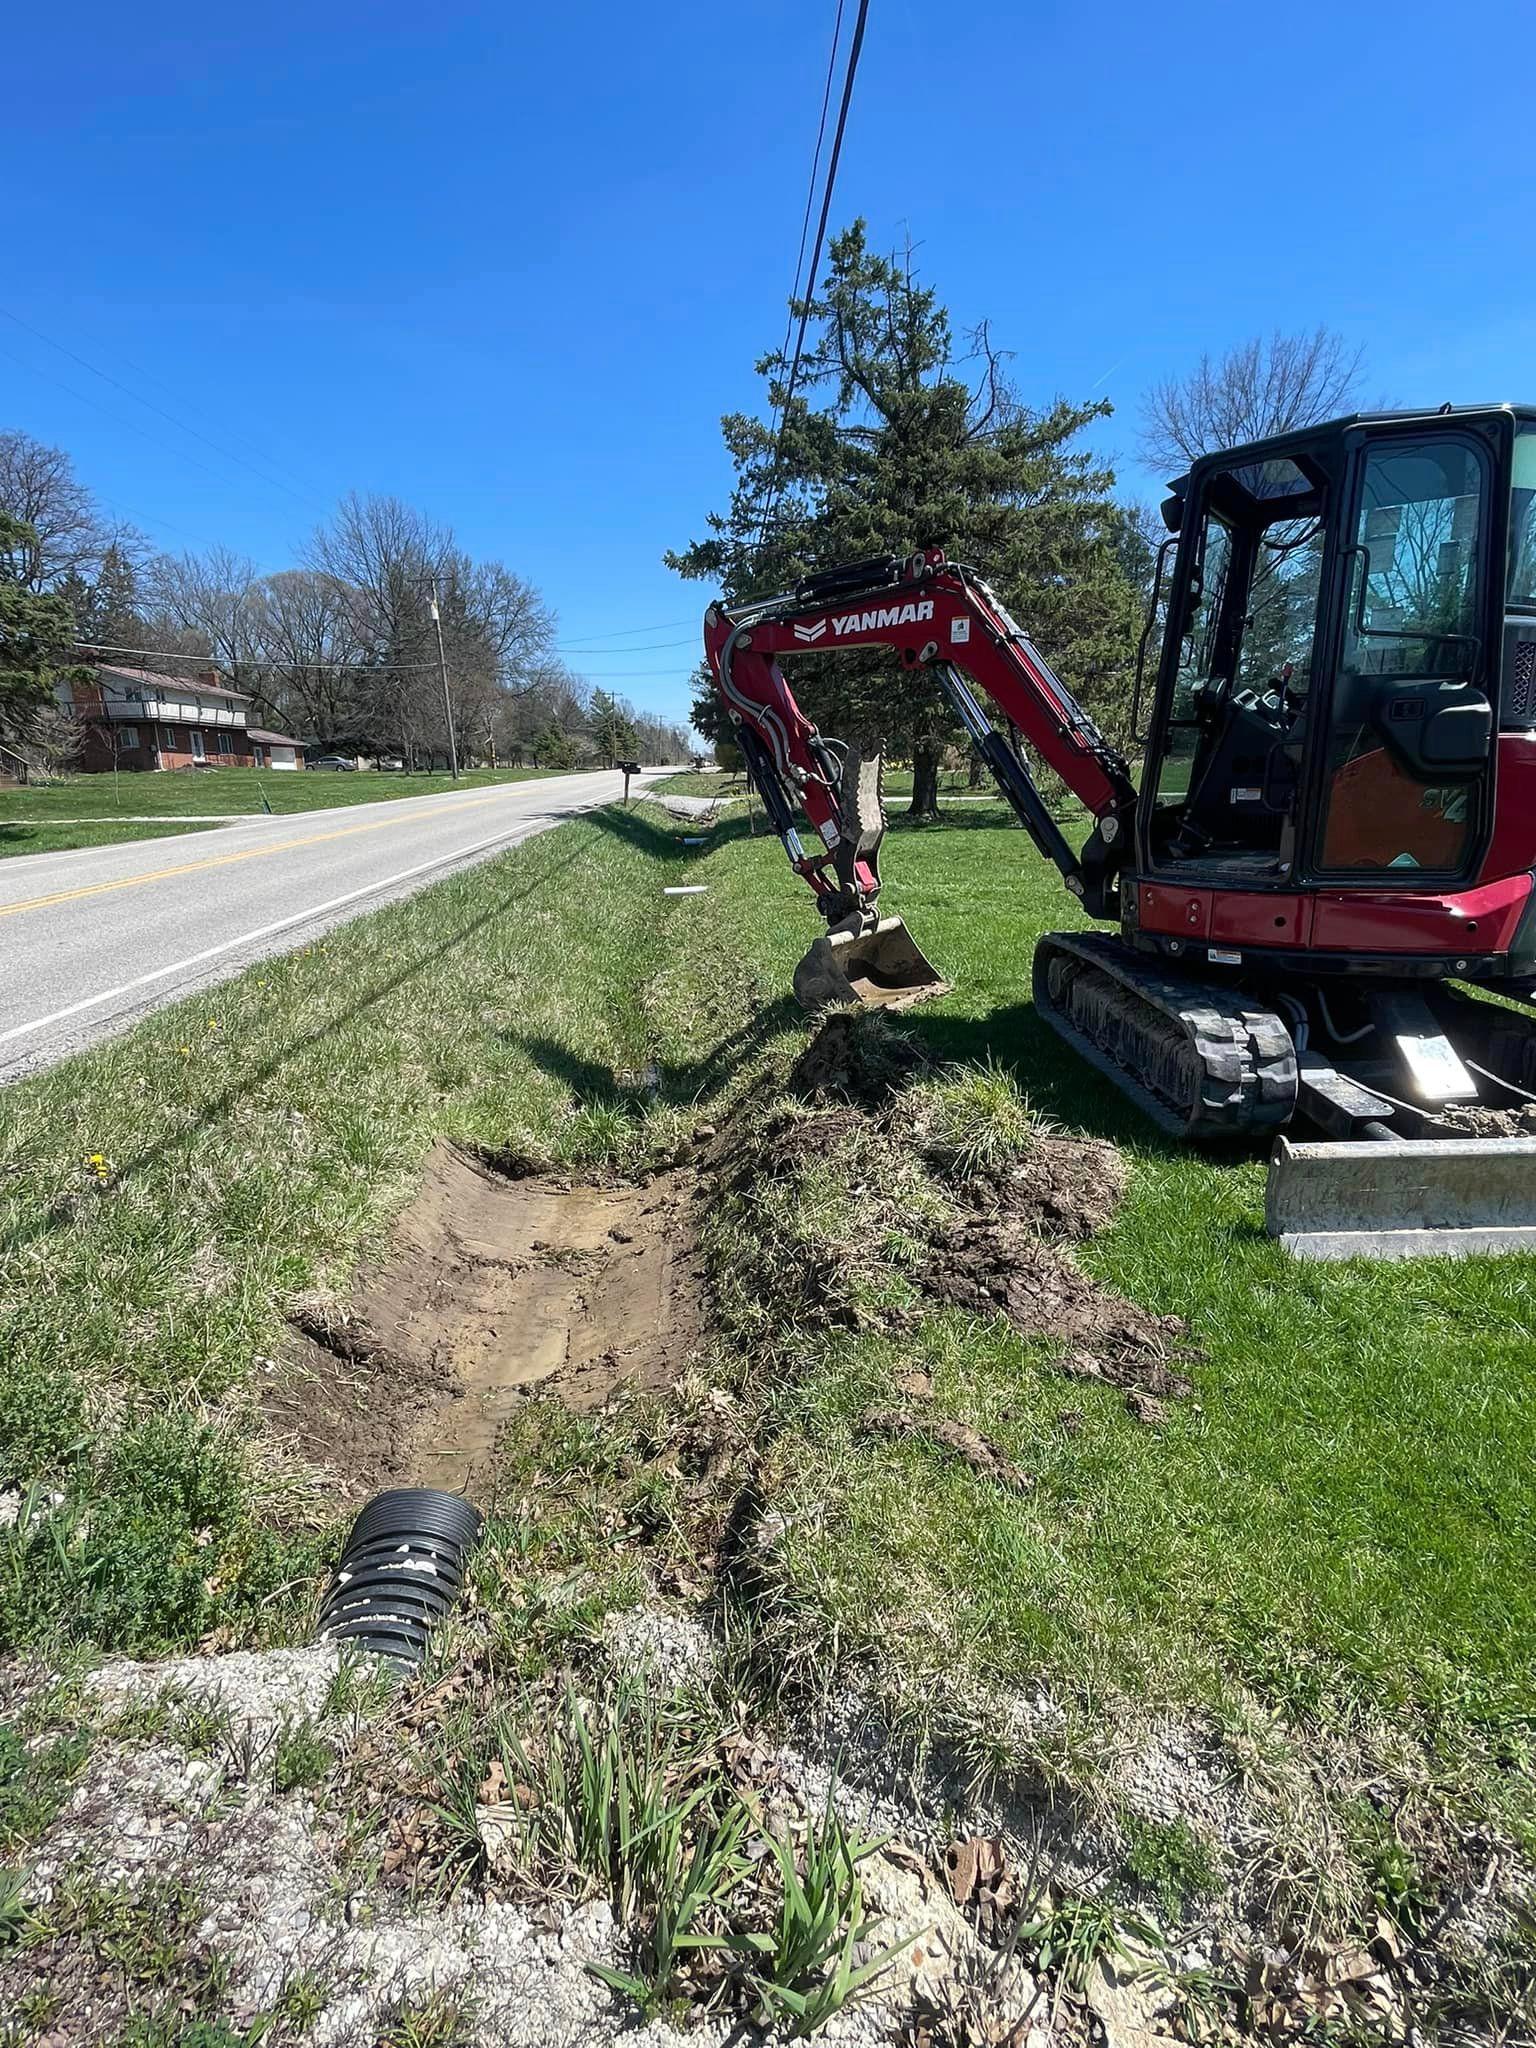 An excavating contractor, Elite Earthworks handles anything that requires a shovel and machine to move dirt—from septic and sewers, to land clearing, pond installation, basement waterproofing, new build and demolition.